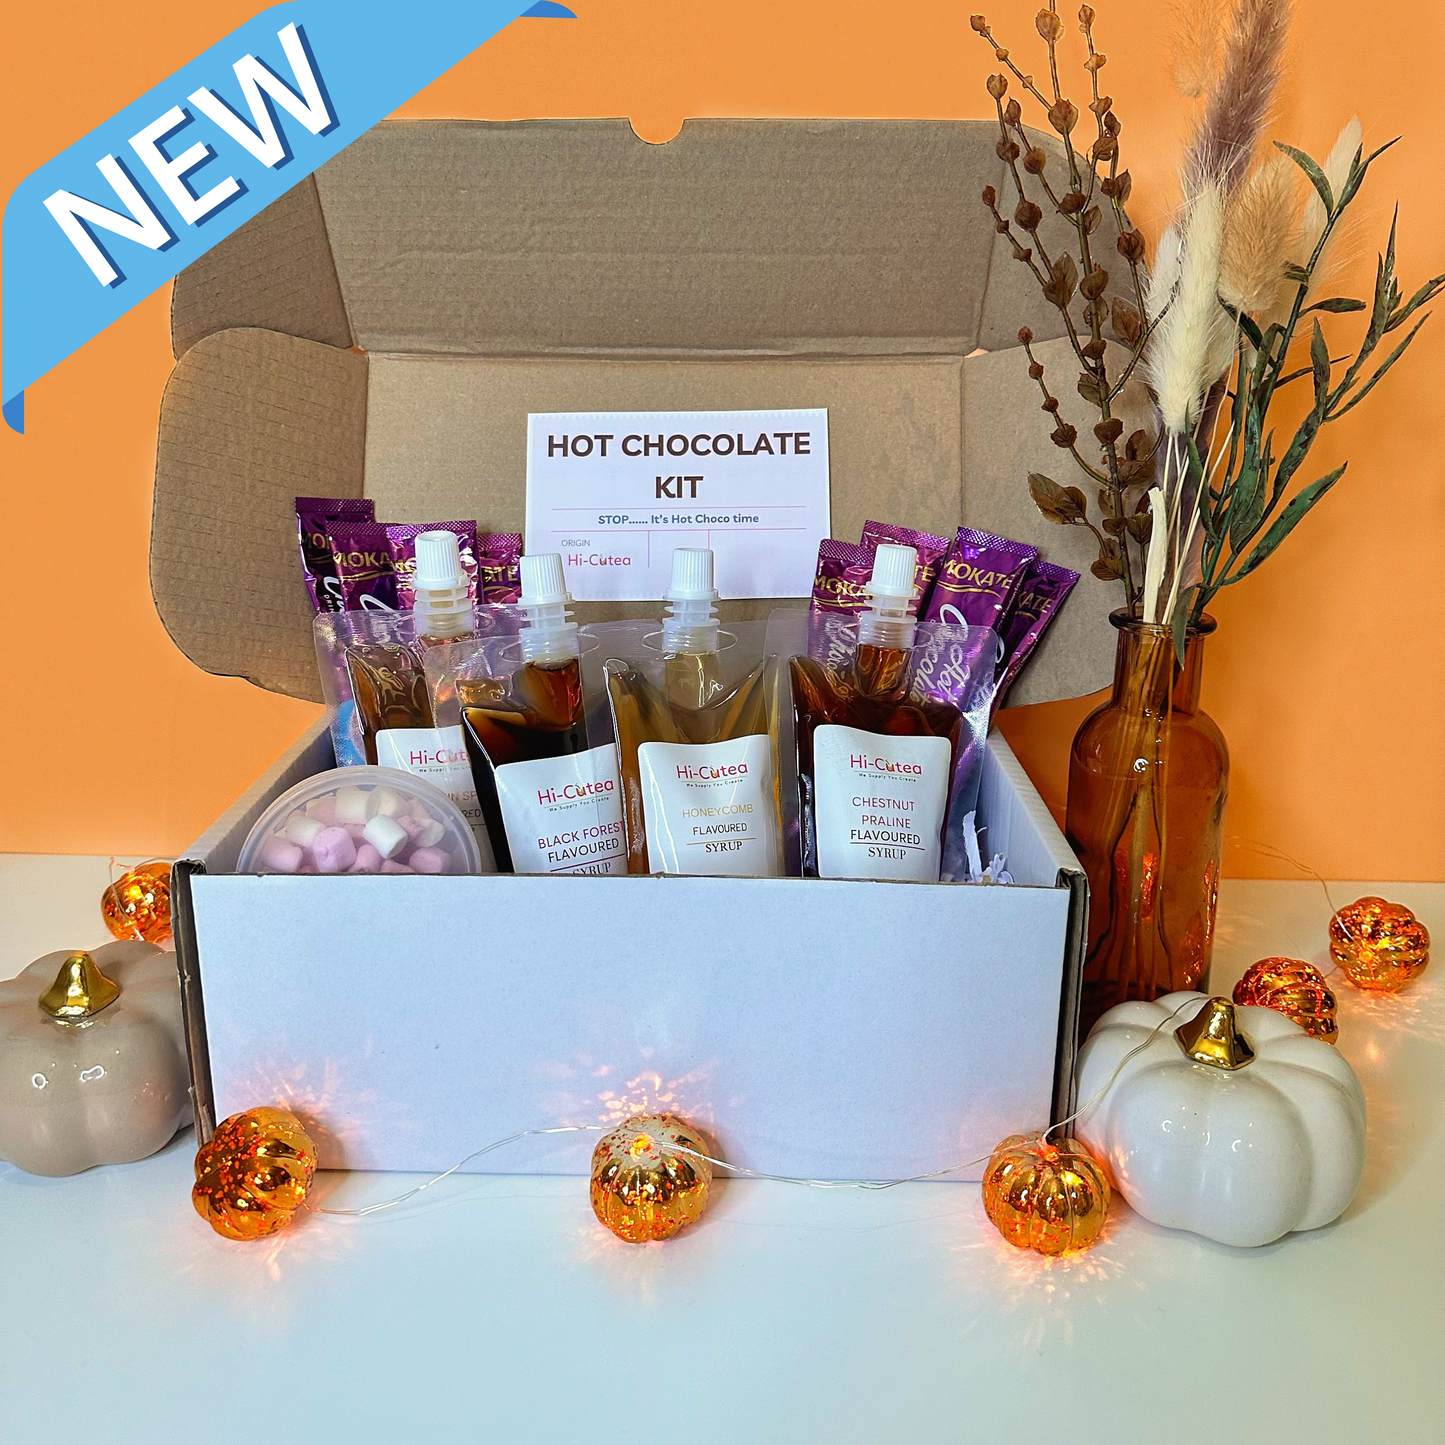 Autumn Hot Chocolate Kit with Black Forest, Pumpkin Spice, Honeycomb, Chestnut Praline Syrups and Marshmallows makes 8 drinks